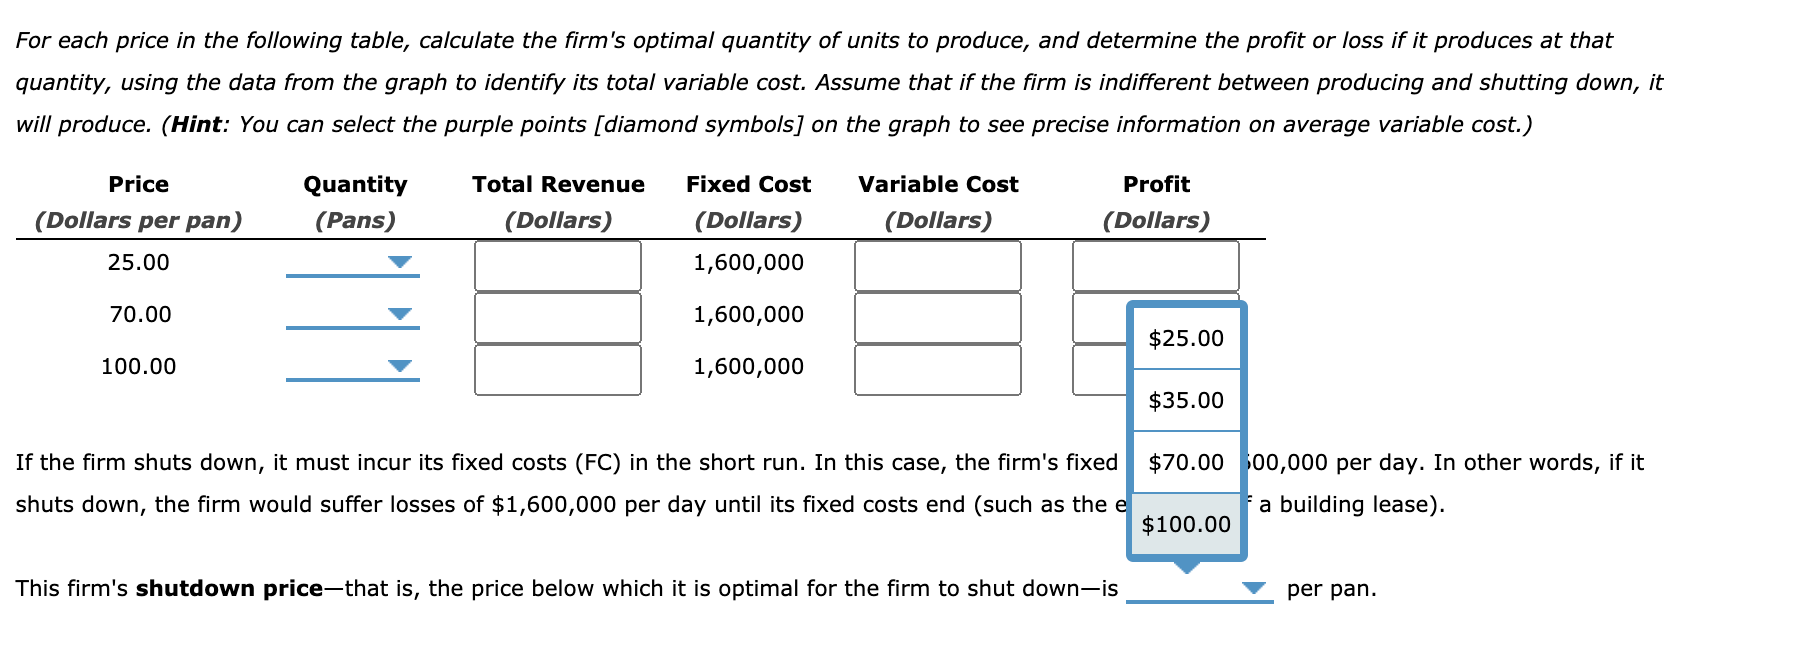 For each price in the following table, calculate the firm's optimal quantity of units to produce, and determine the profit or loss if it produces at that
quantity, using the data from the graph to identify its total variable cost. Assume that if the firm is indifferent between producing and shutting down, it
will produce. (Hint: You can select the purple points [diamond symbols] on the graph to see precise information on average variable cost.)
Price
Quantity
Total Revenue
Fixed Cost
Variable Cost
Profit
(Dollars per pan)
(Pans)
(Dollars)
(Dollars)
(Dollars)
(Dollars)
25.00
1,600,000
70.00
1,600,000
$25.00
100.00
1,600,000
$35.00
If the firm shuts down, it must incur its fixed costs (FC) in the short run. In this case, the firm's fixed
$70.00 00,000 per day. In other words, if it
shuts down, the firm would suffer losses of $1,600,000 per day until its fixed costs end (such as the e
a building lease).
$100.00
This firm's shutdown price-that is, the price below which it is optimal for the firm to shut down-is
per pan.
